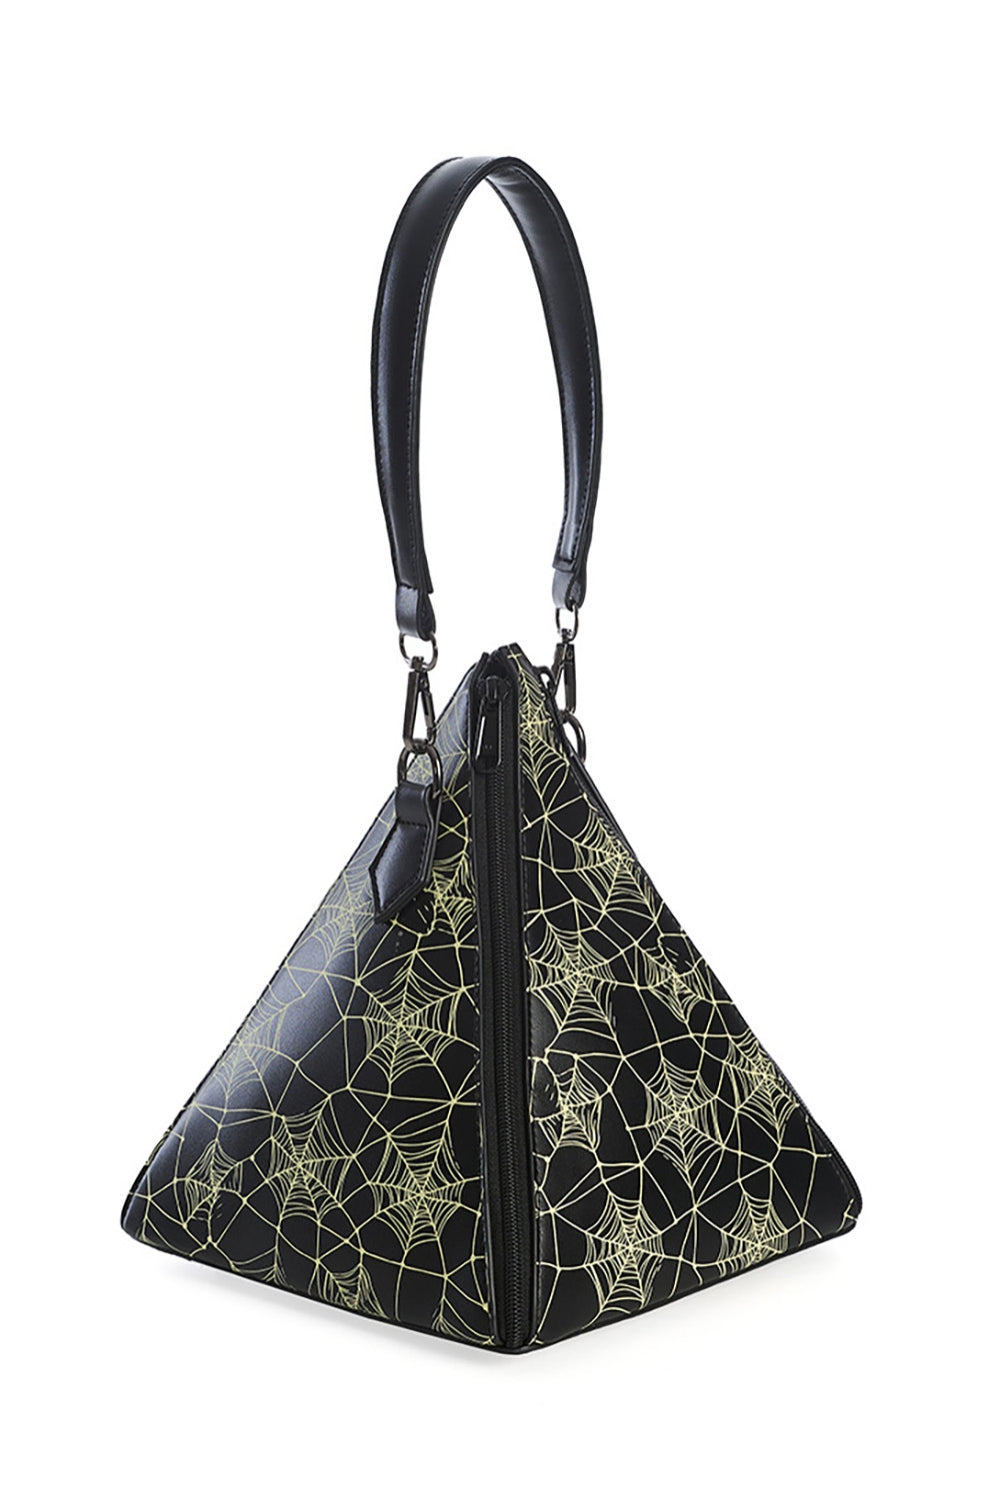 Pyramid shaped purse with all over glow in the dark cobweb printed pattern. It has a matching black faux leather shoulder strap and there are two vertical black zippers running down the side of the pyramid. Shown from the zippered side from the front